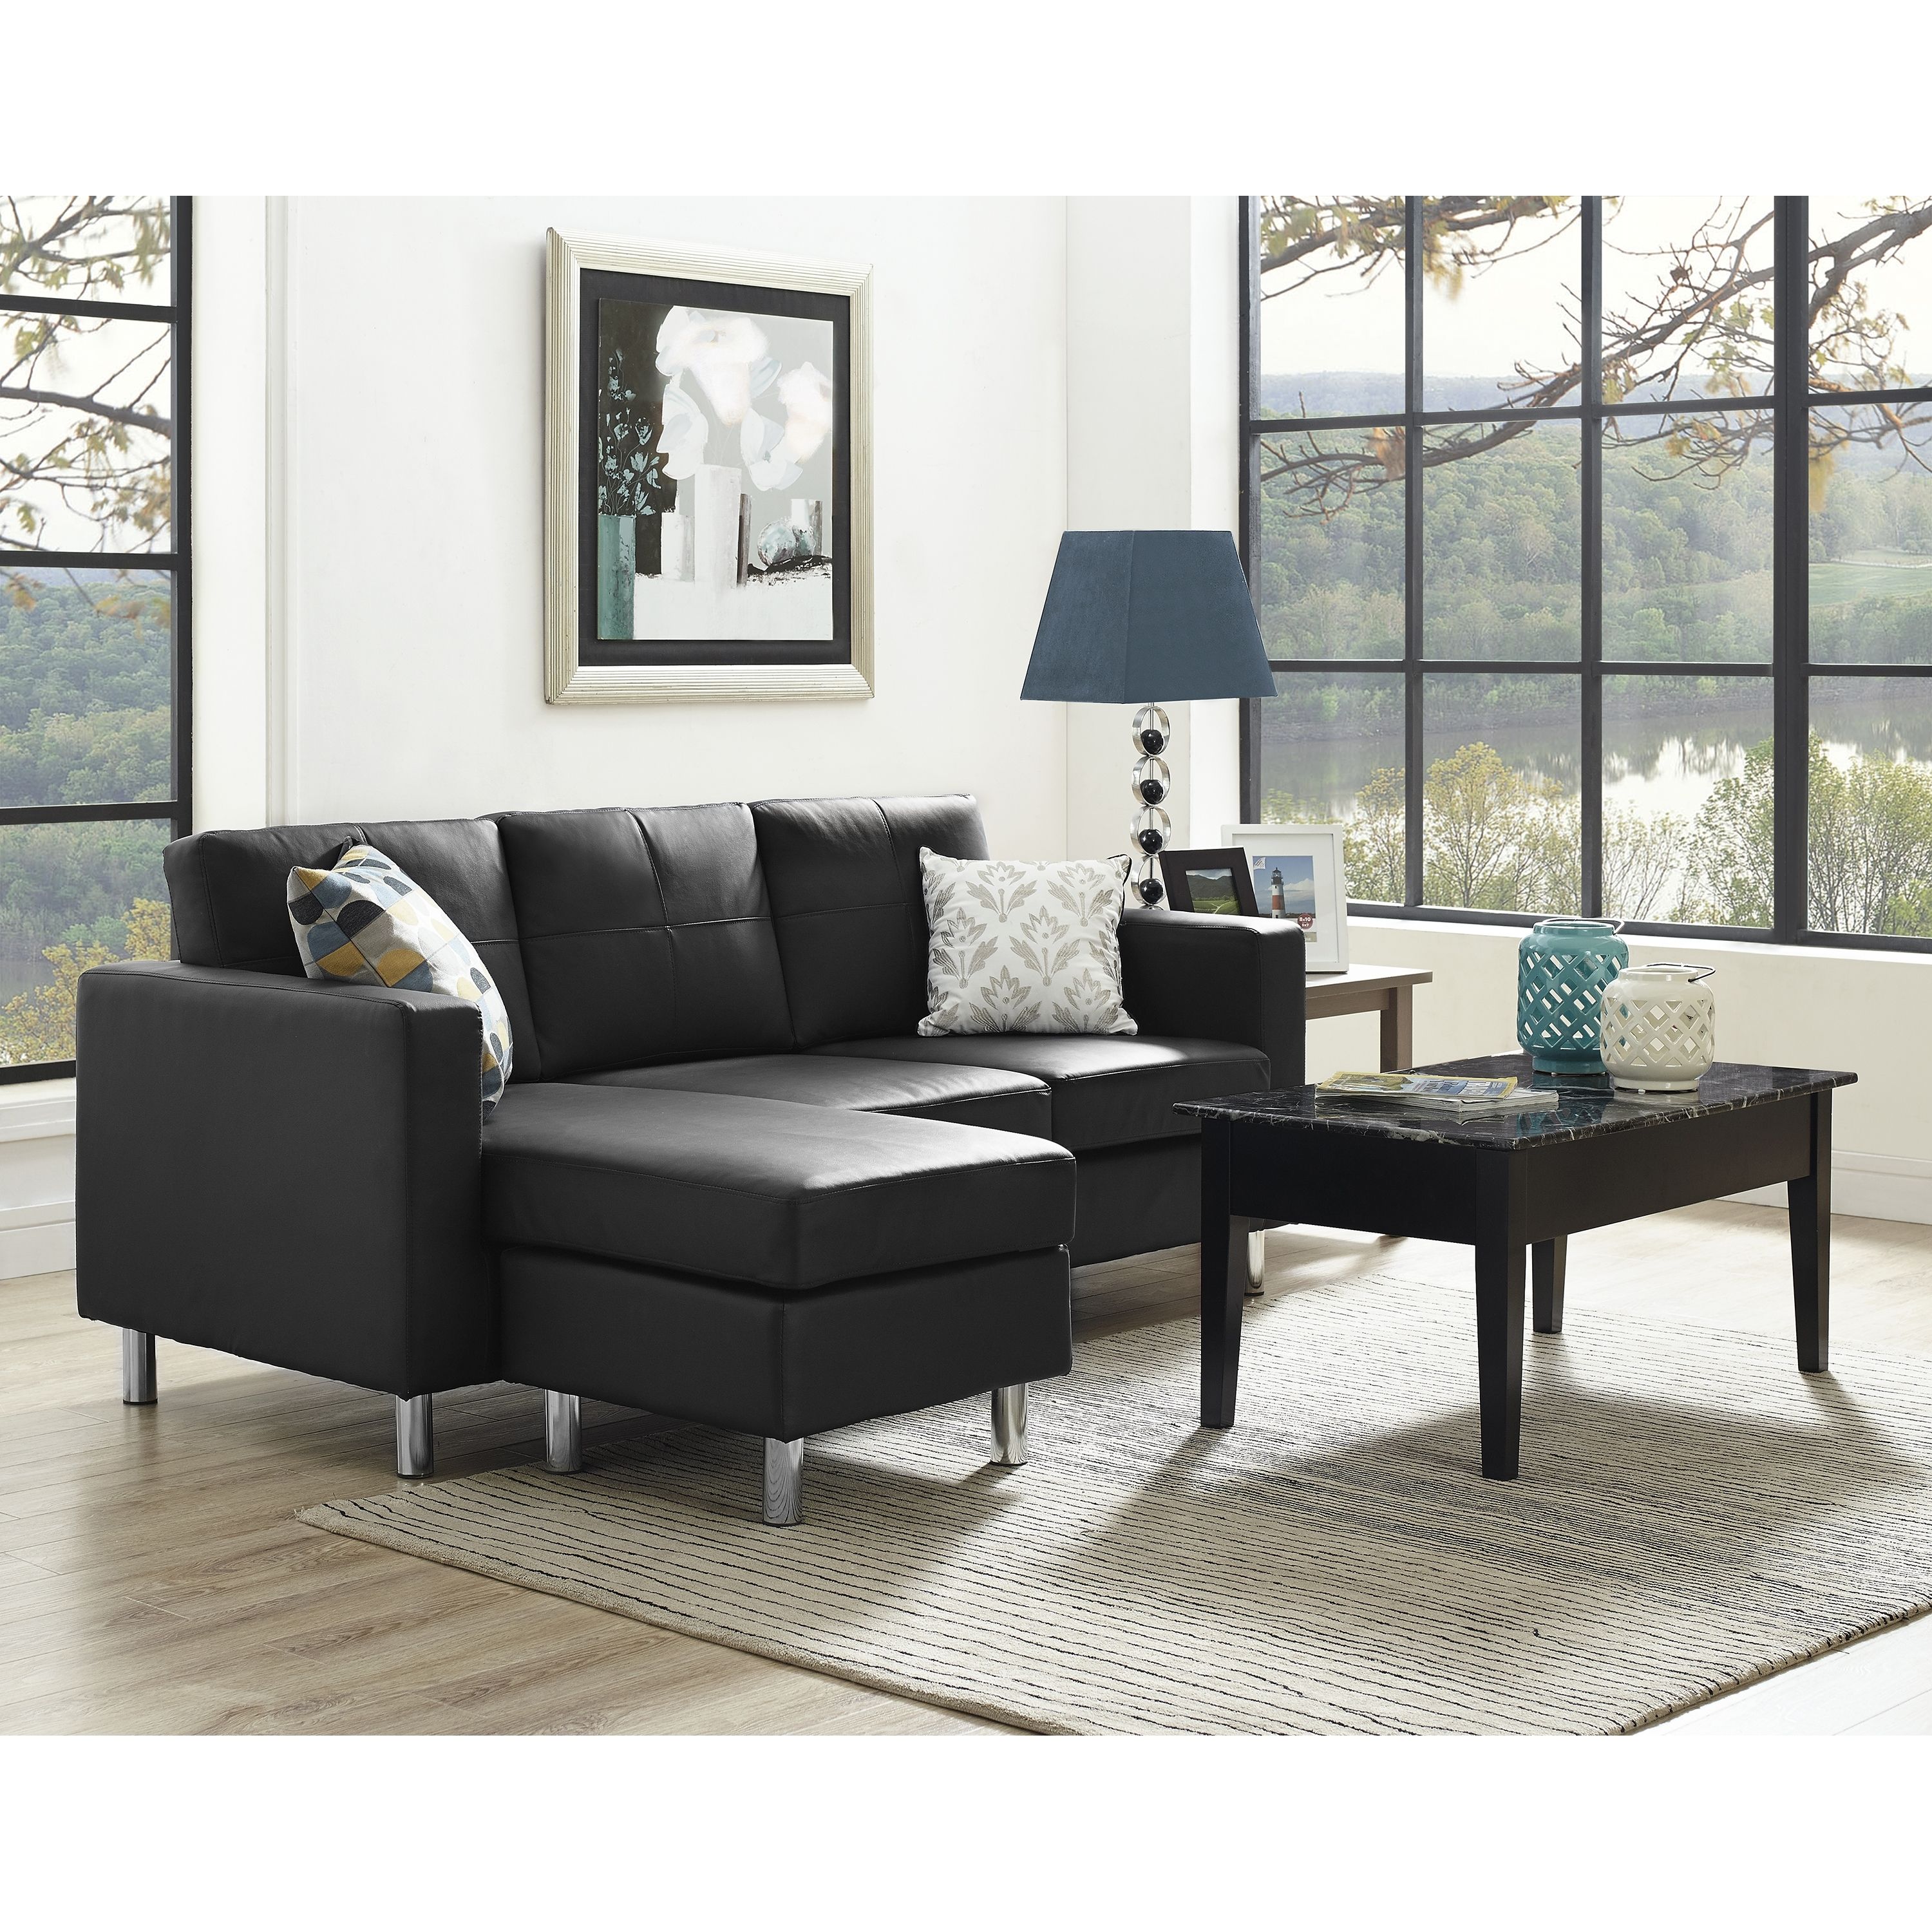 Best Sears Sectional Sofa 79 In Costco Leather Sectional Sofa With Throughout Sectional Sofas At Sears (Photo 4 of 10)